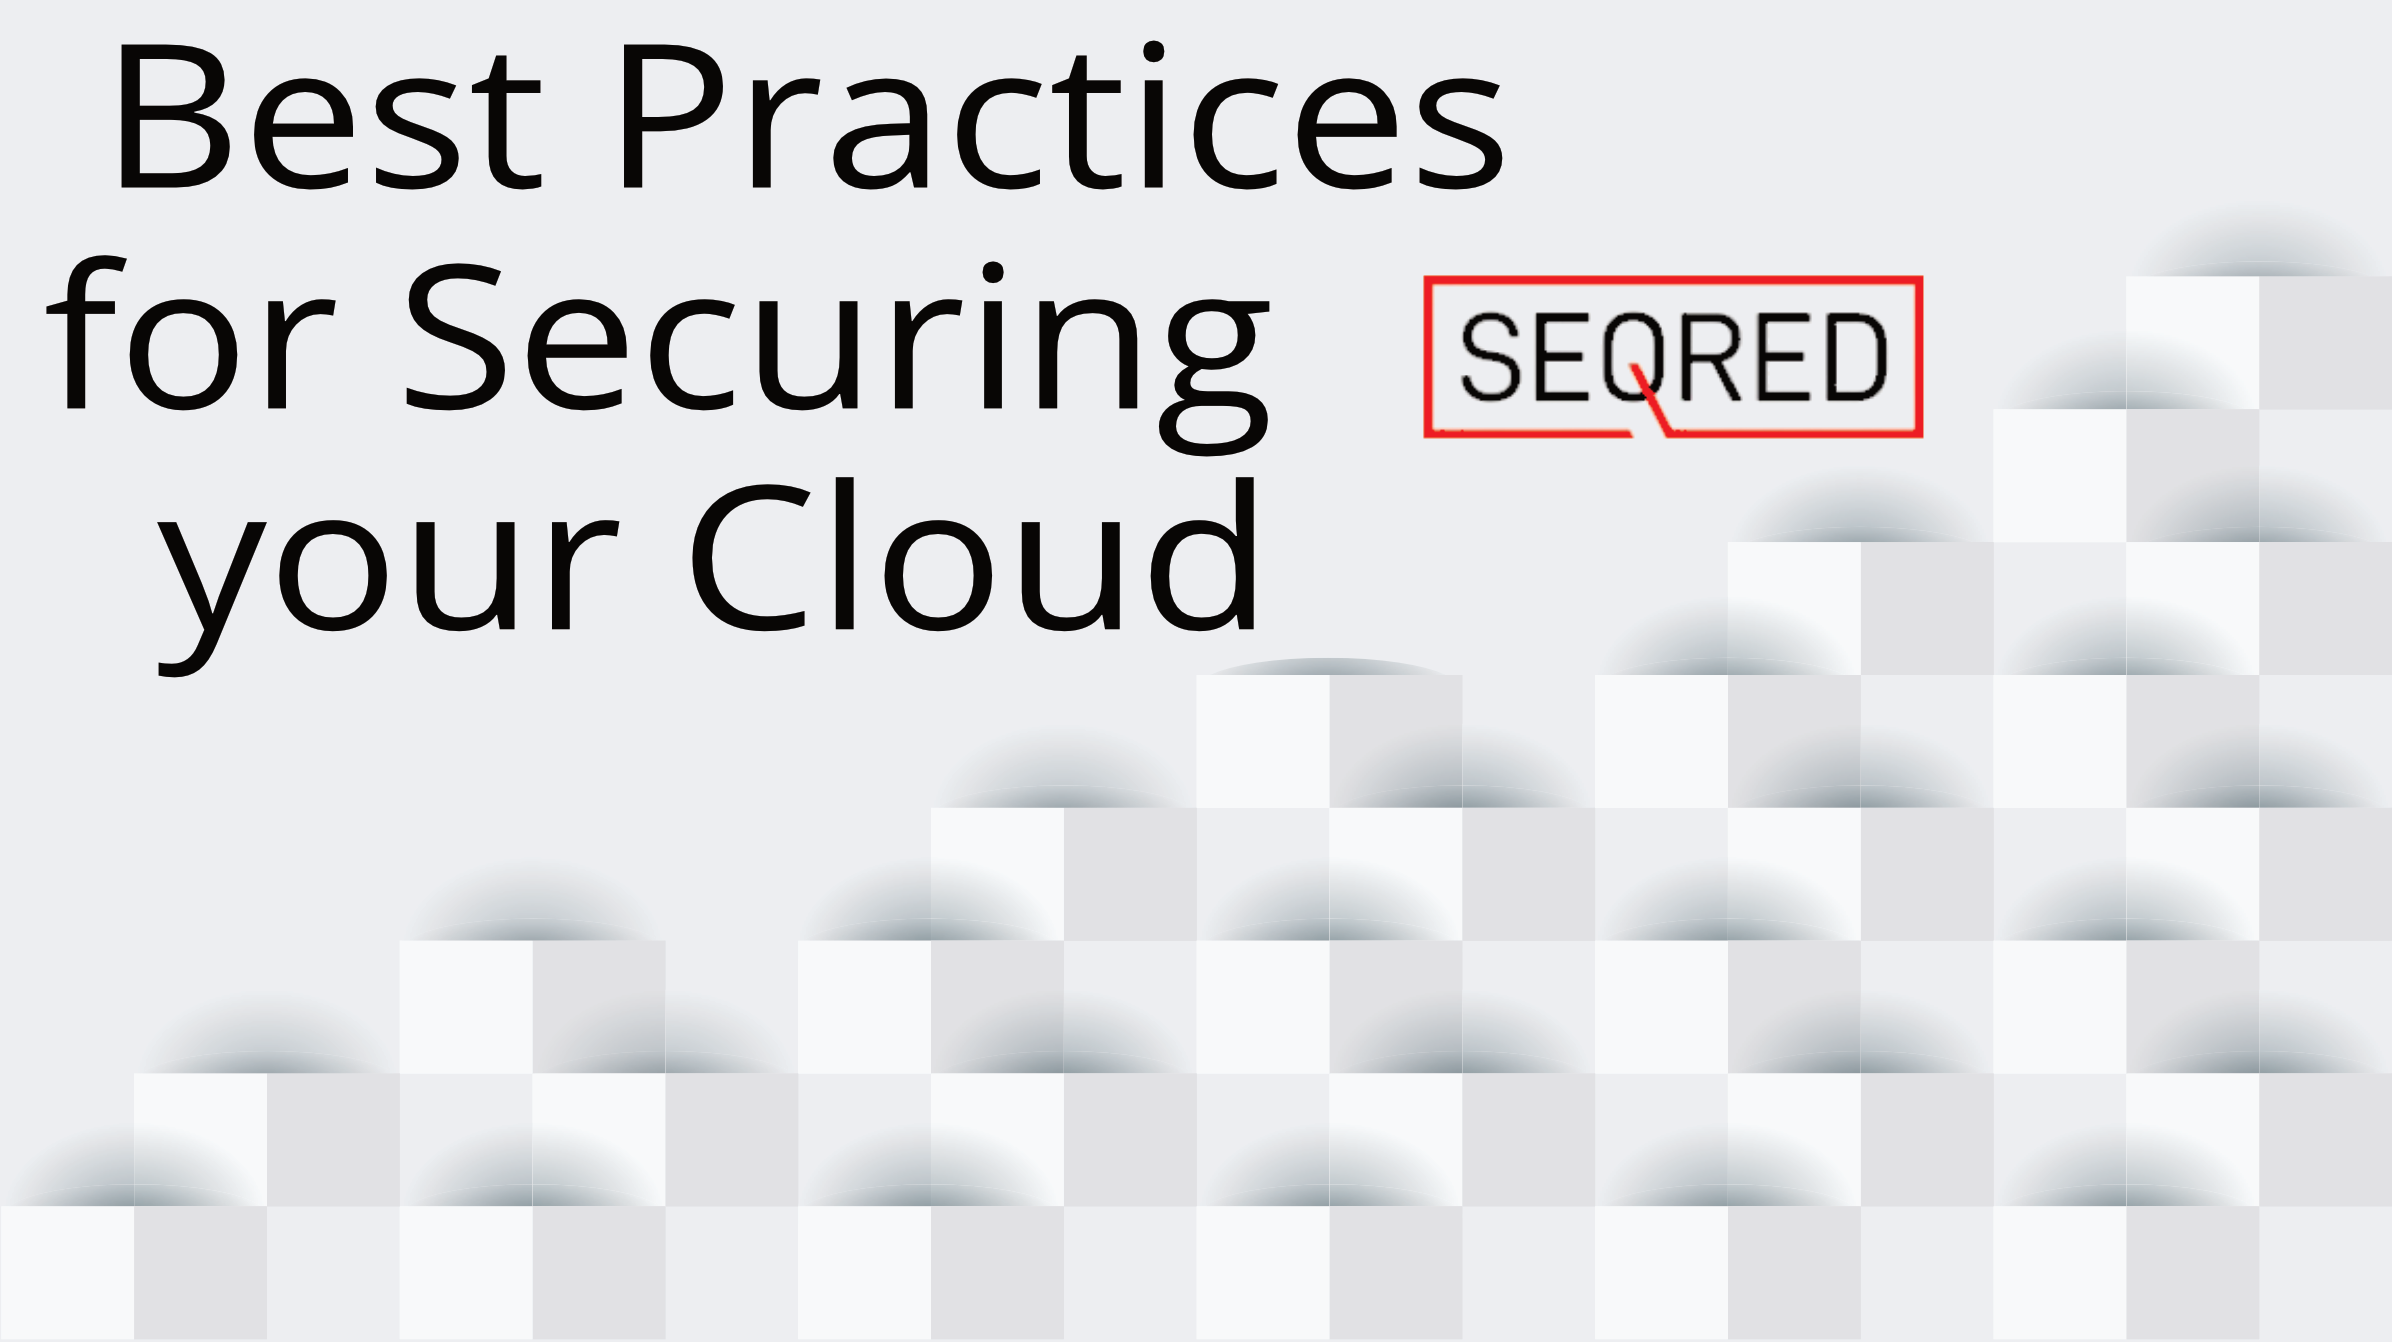 Best practices for securing your cloud